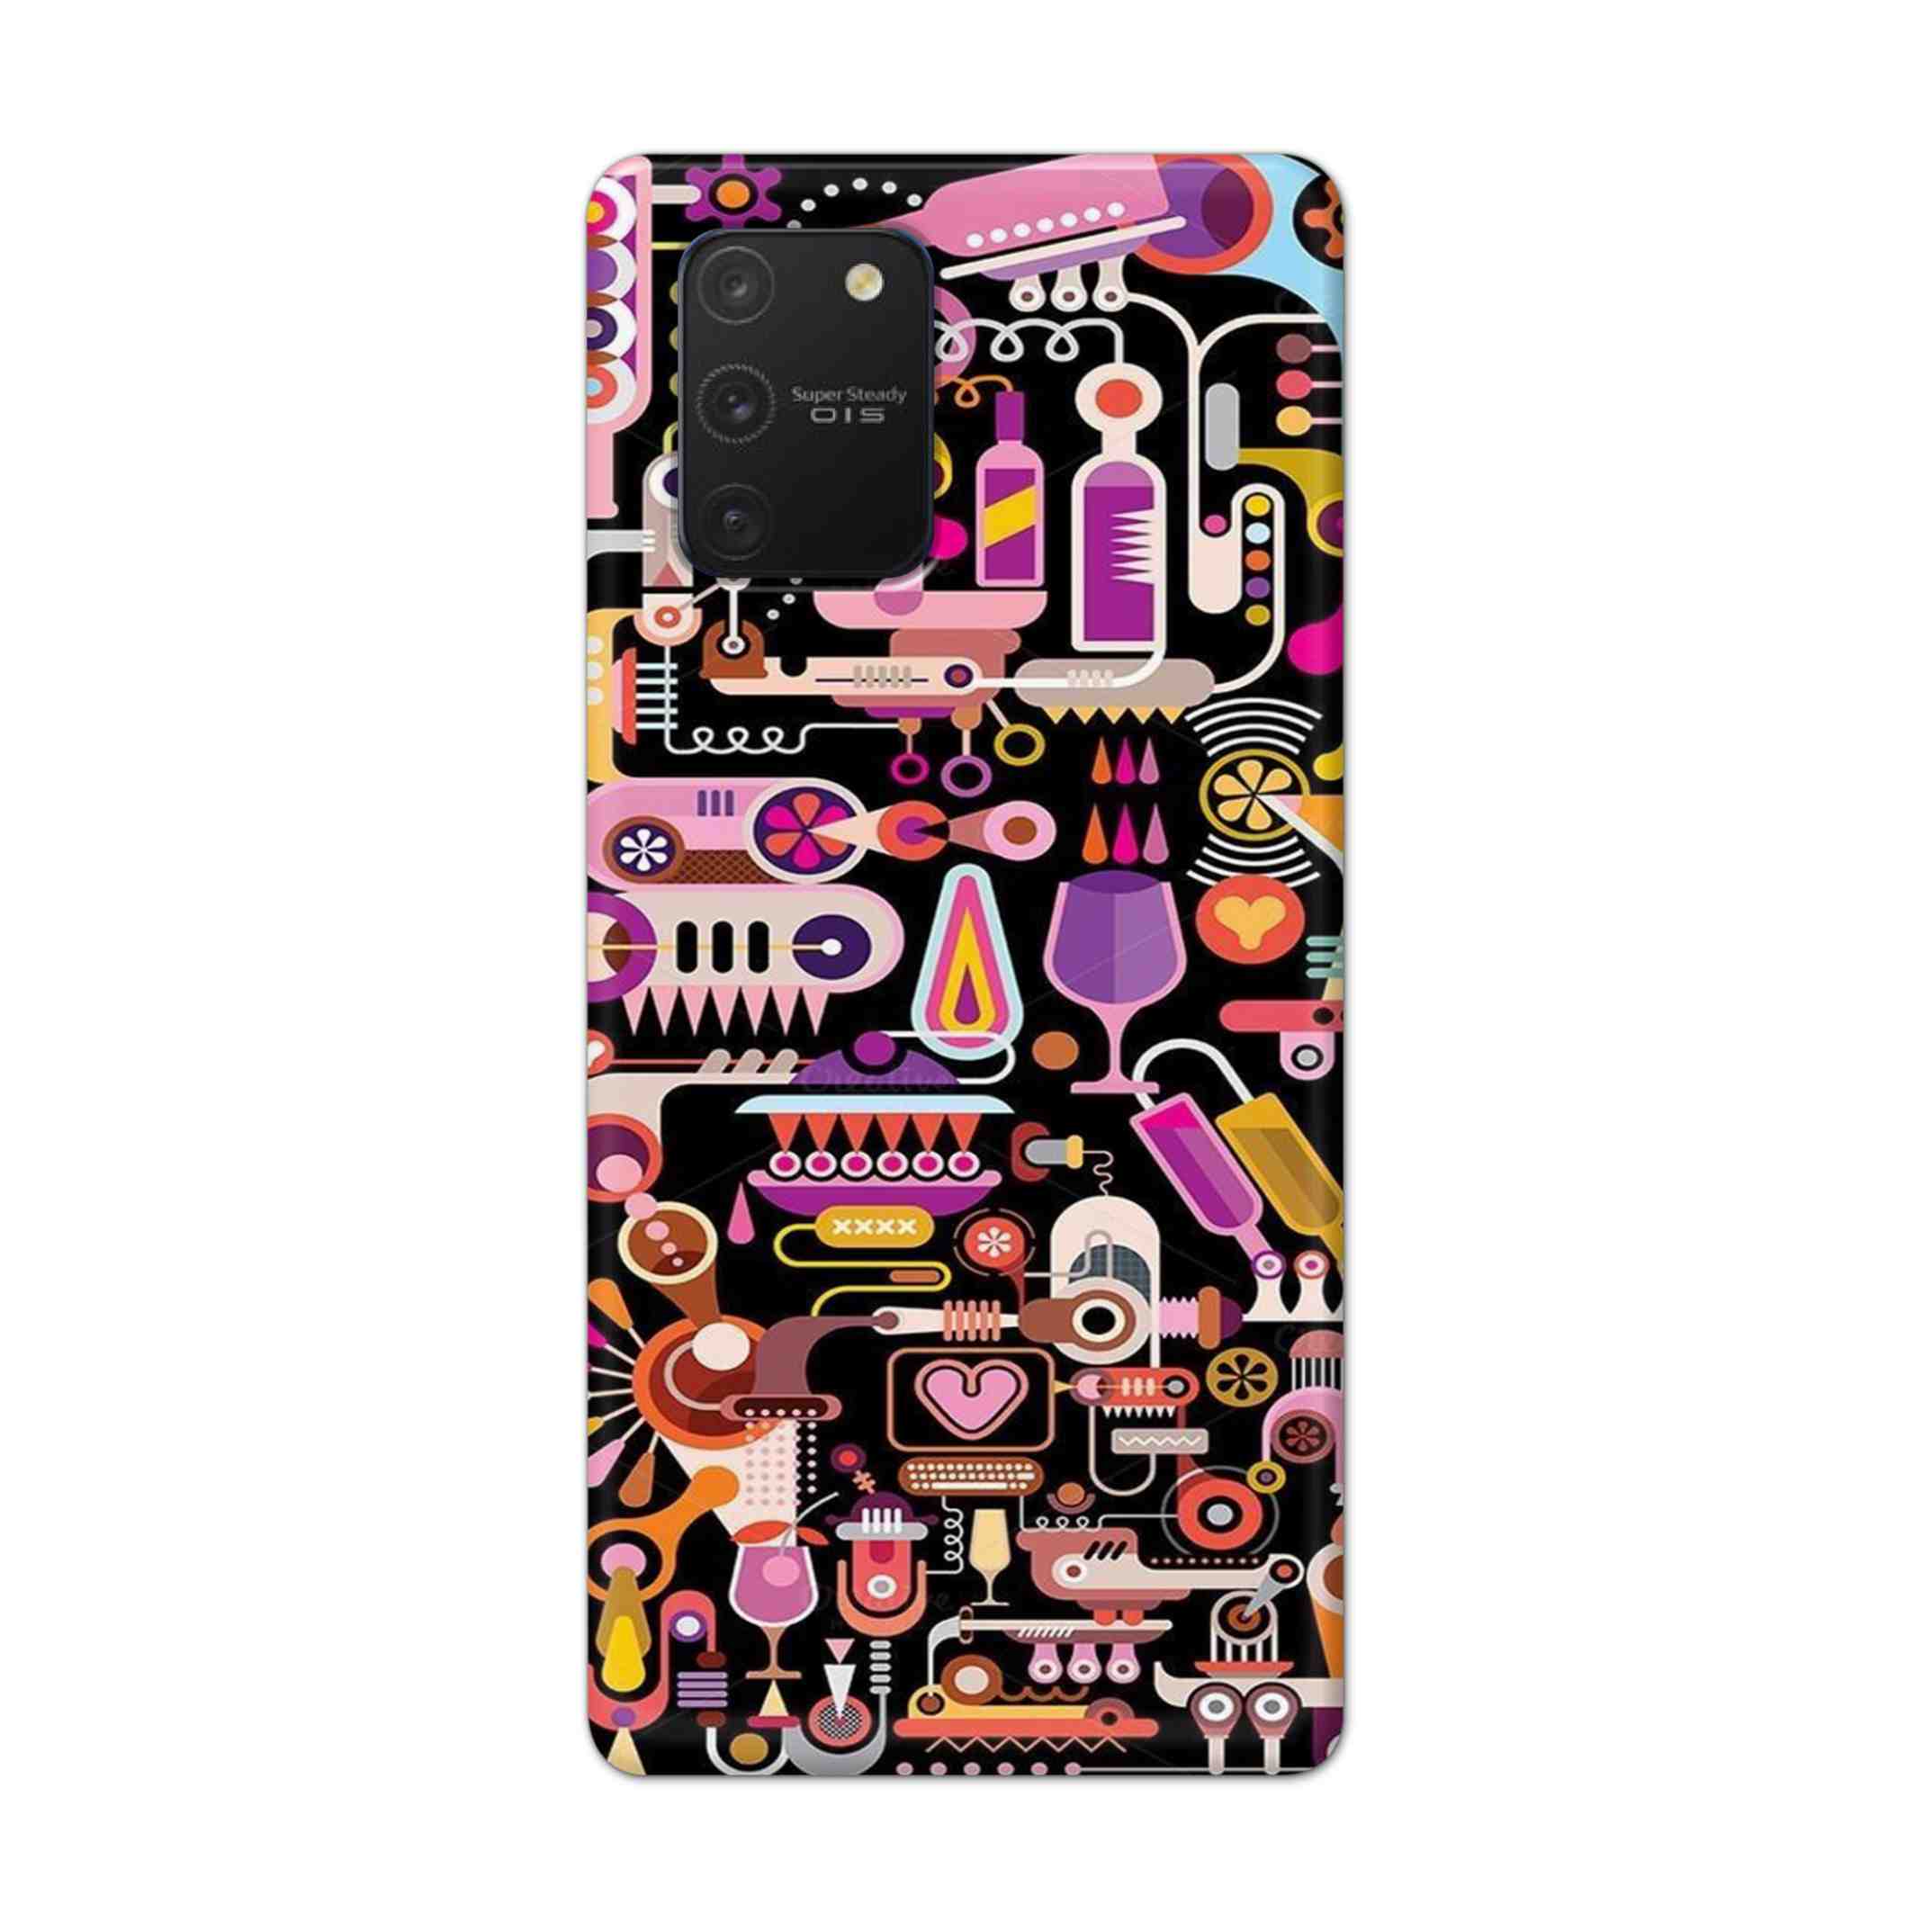 Buy Lab Art Hard Back Mobile Phone Case Cover For Samsung Galaxy S10 Lite Online